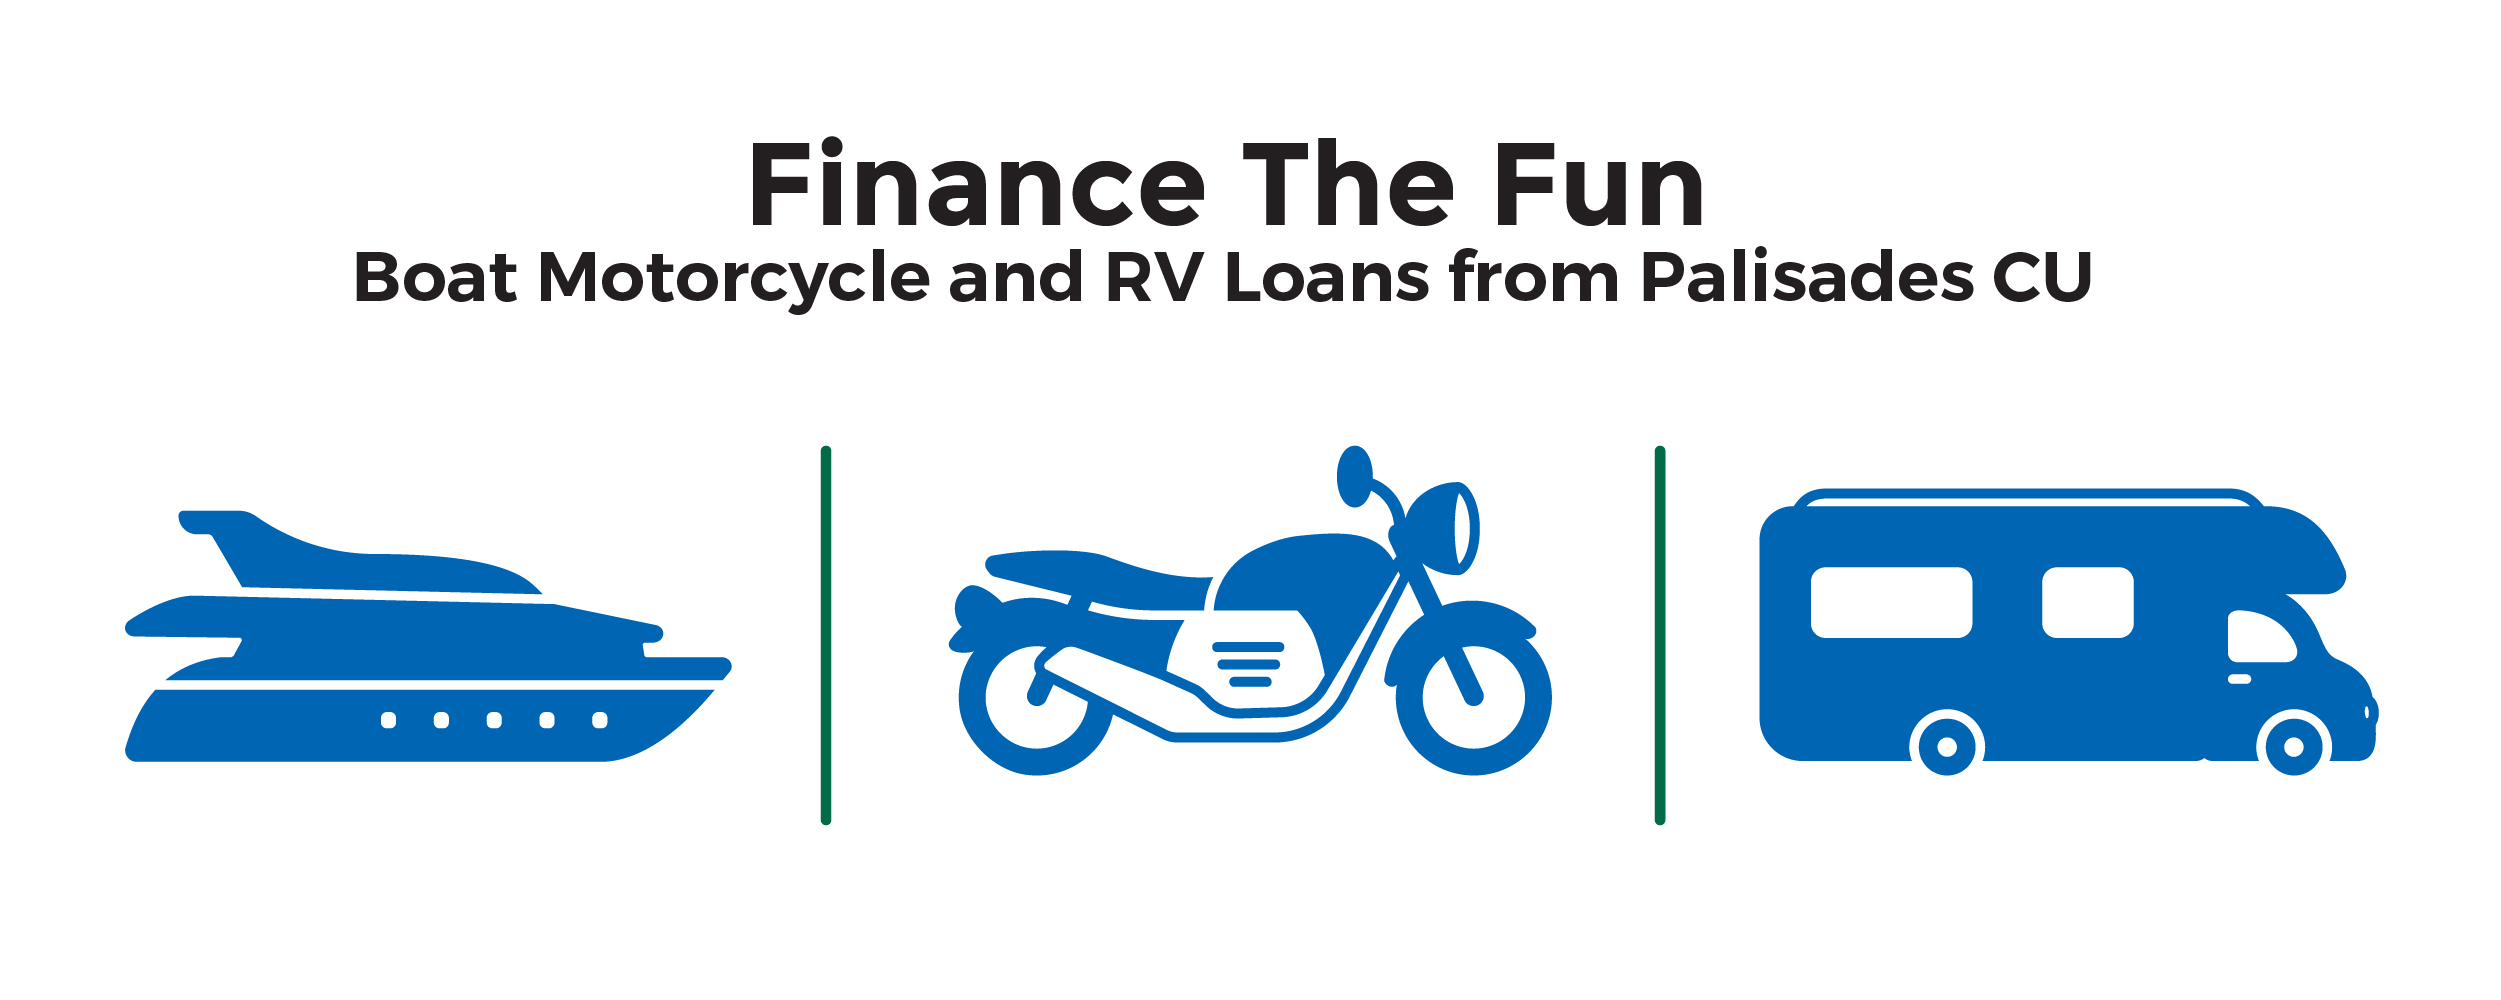 Finance The Fun - Boat Motorcycle and RV Loans from Palisades CU - Image of a Boat, Motorcycle and RV